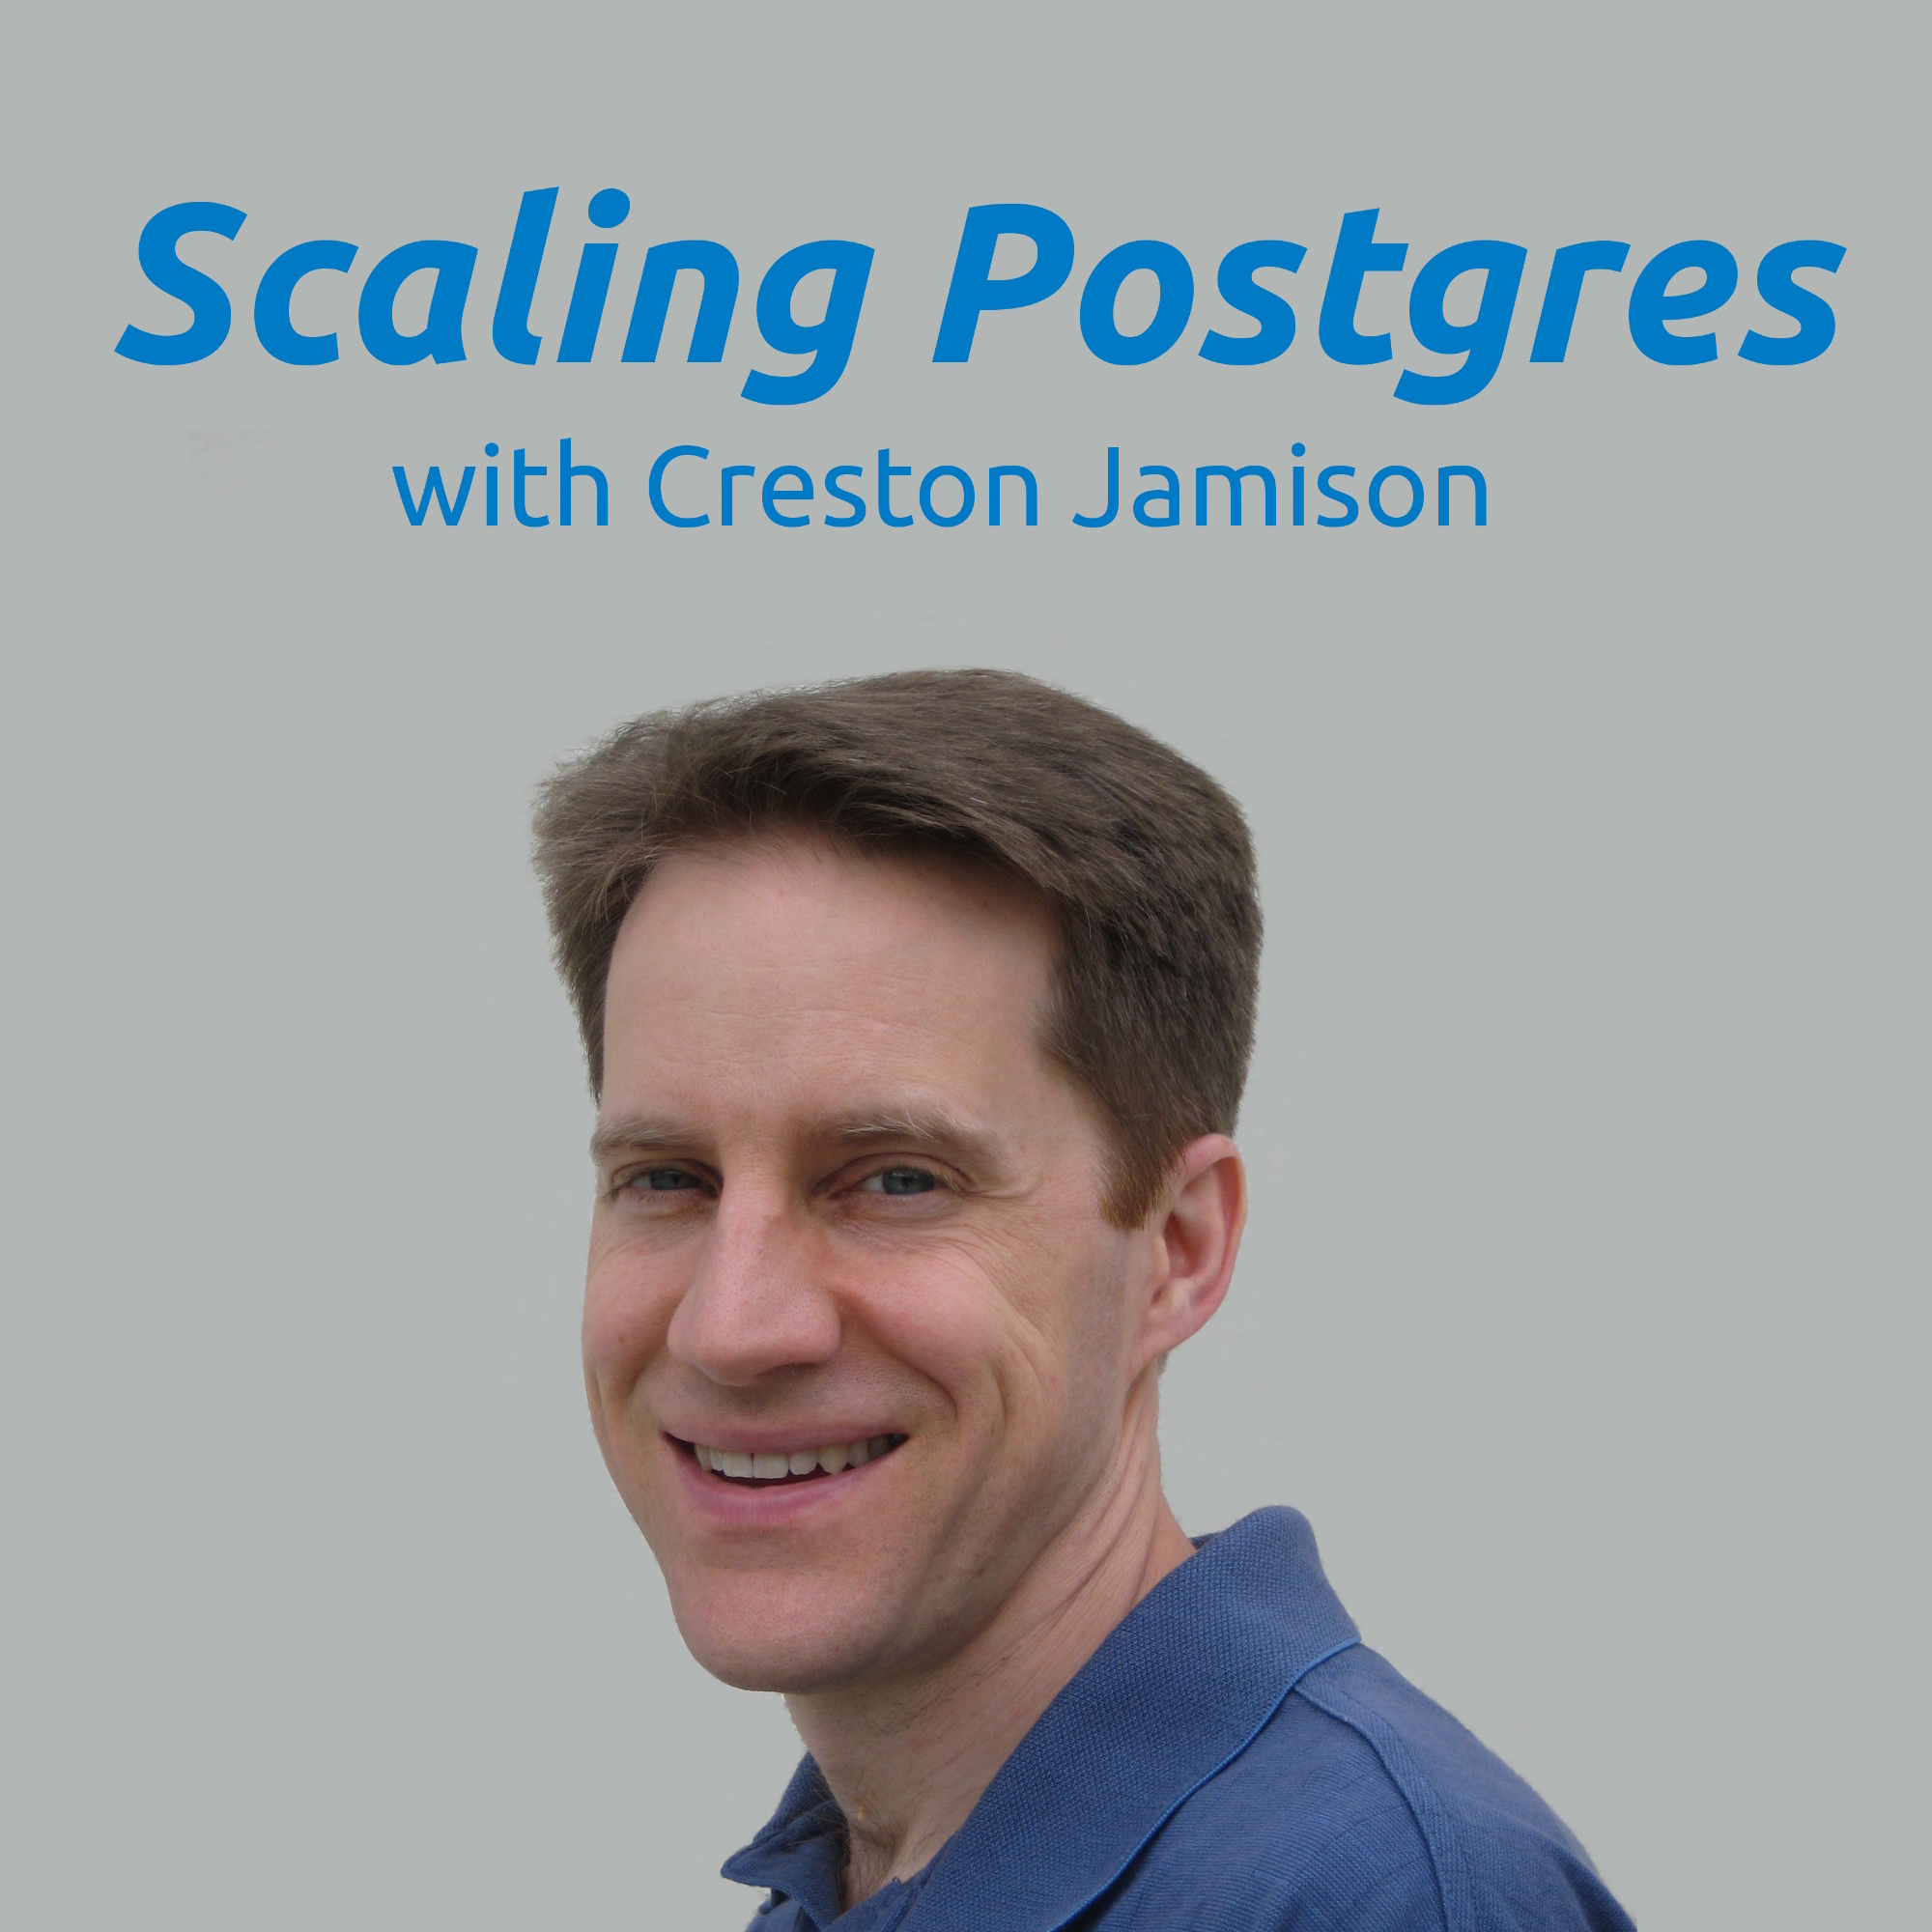 Value of SQL, Window Functions, DB Migrations, Data Storage | Scaling Postgres 51